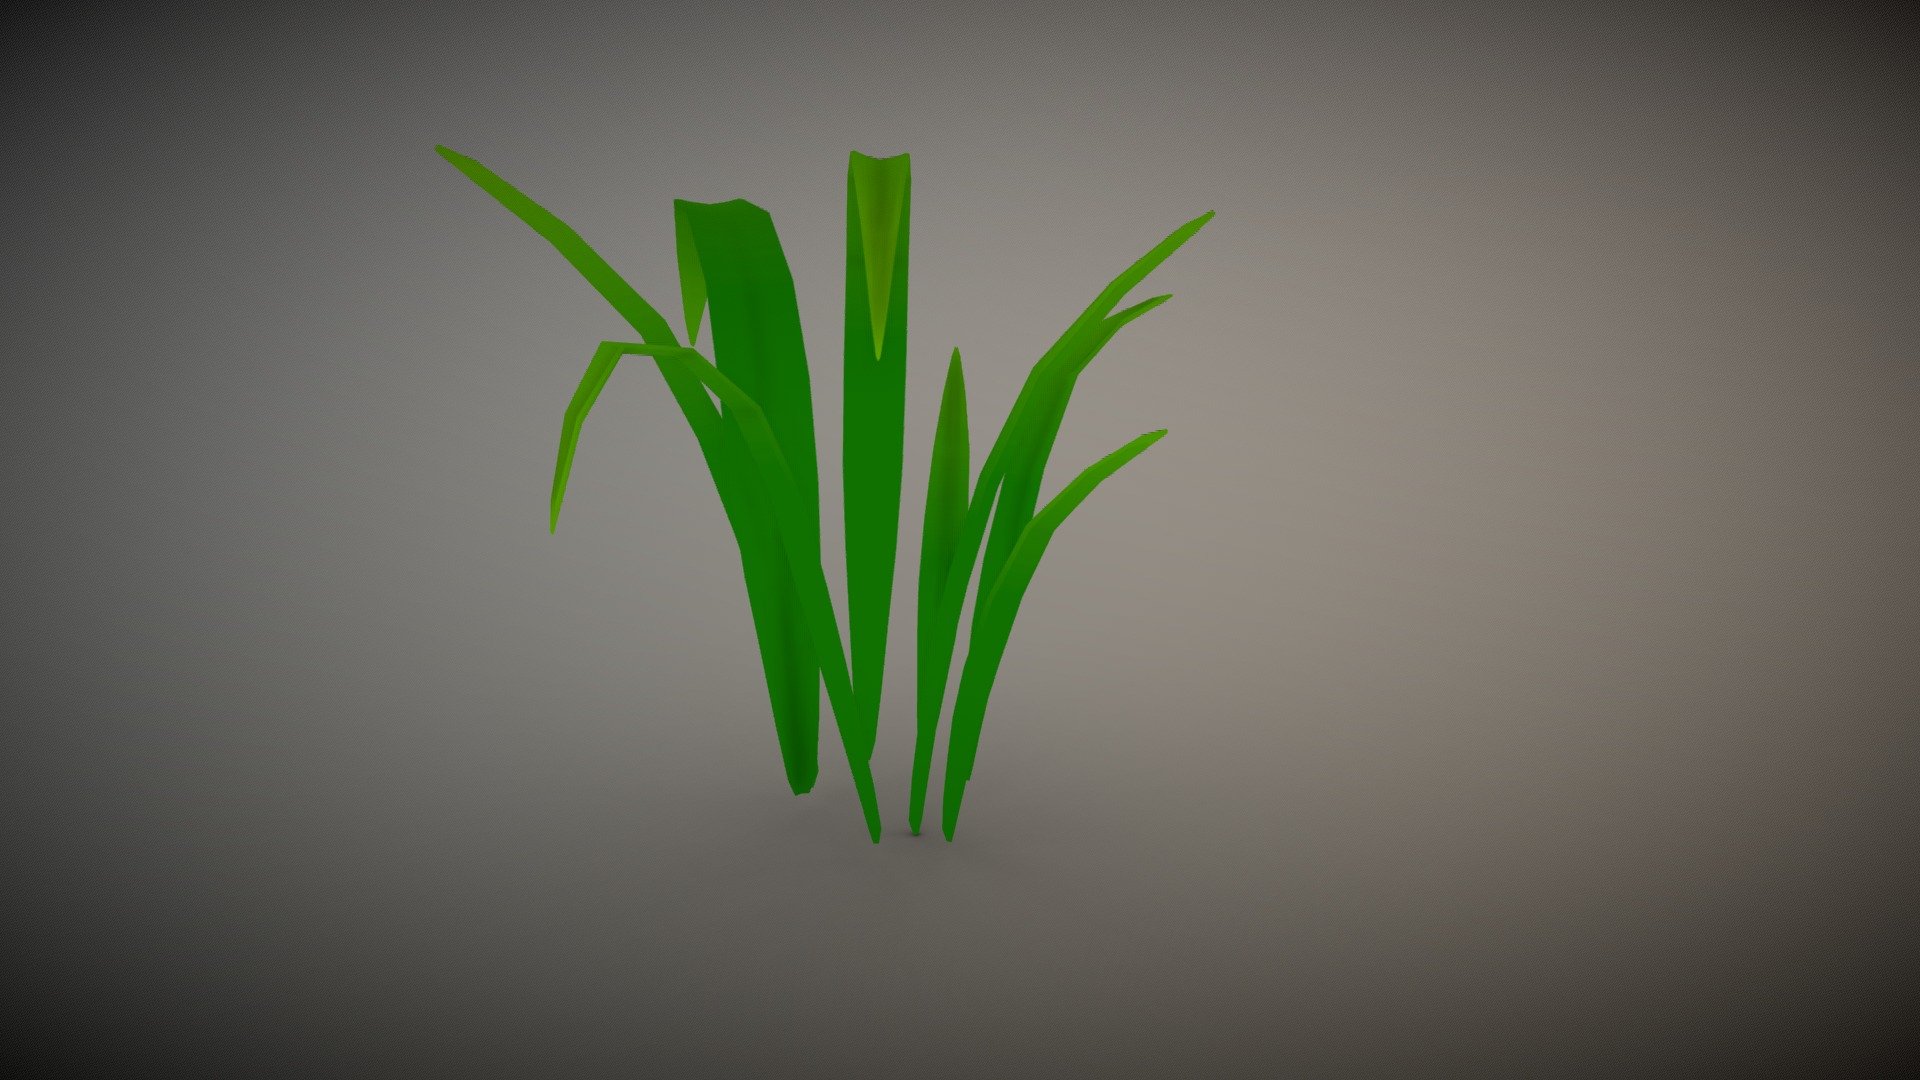 This is a 3D modeled grass clump asset that I created in Maya. The diffuse color map is a green gradient created in Photoshop. The angle of the grass blades make for easily covering small to medium areas. This asset is also modular and can be used in various different environmental situations 3d model